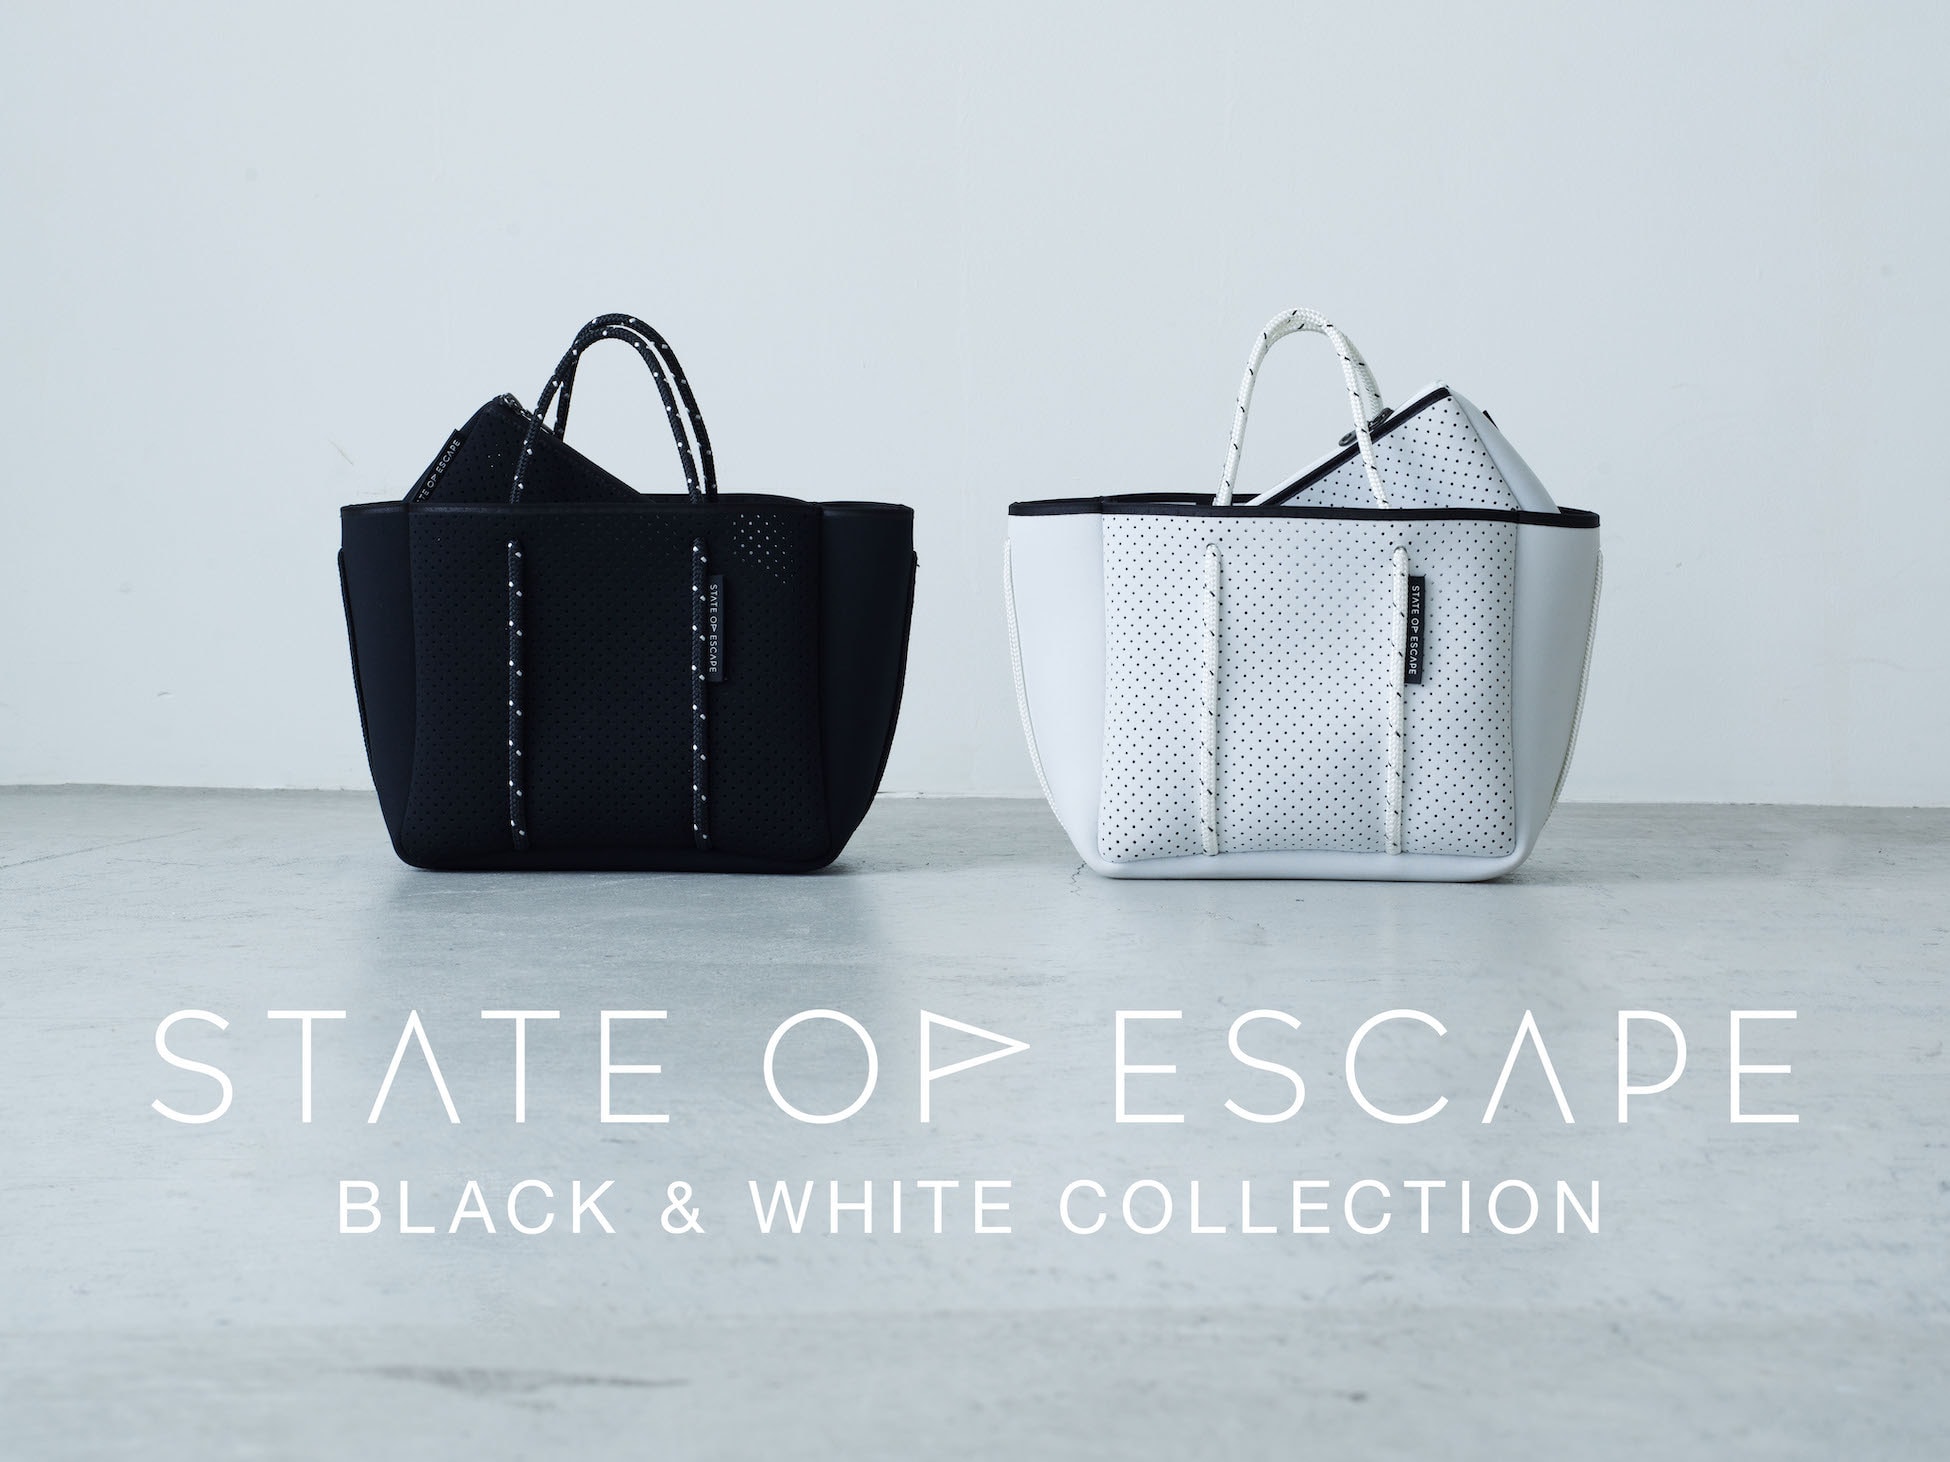 STATE OF ESCAPE pop up store "BLACK & WHITE Collection"